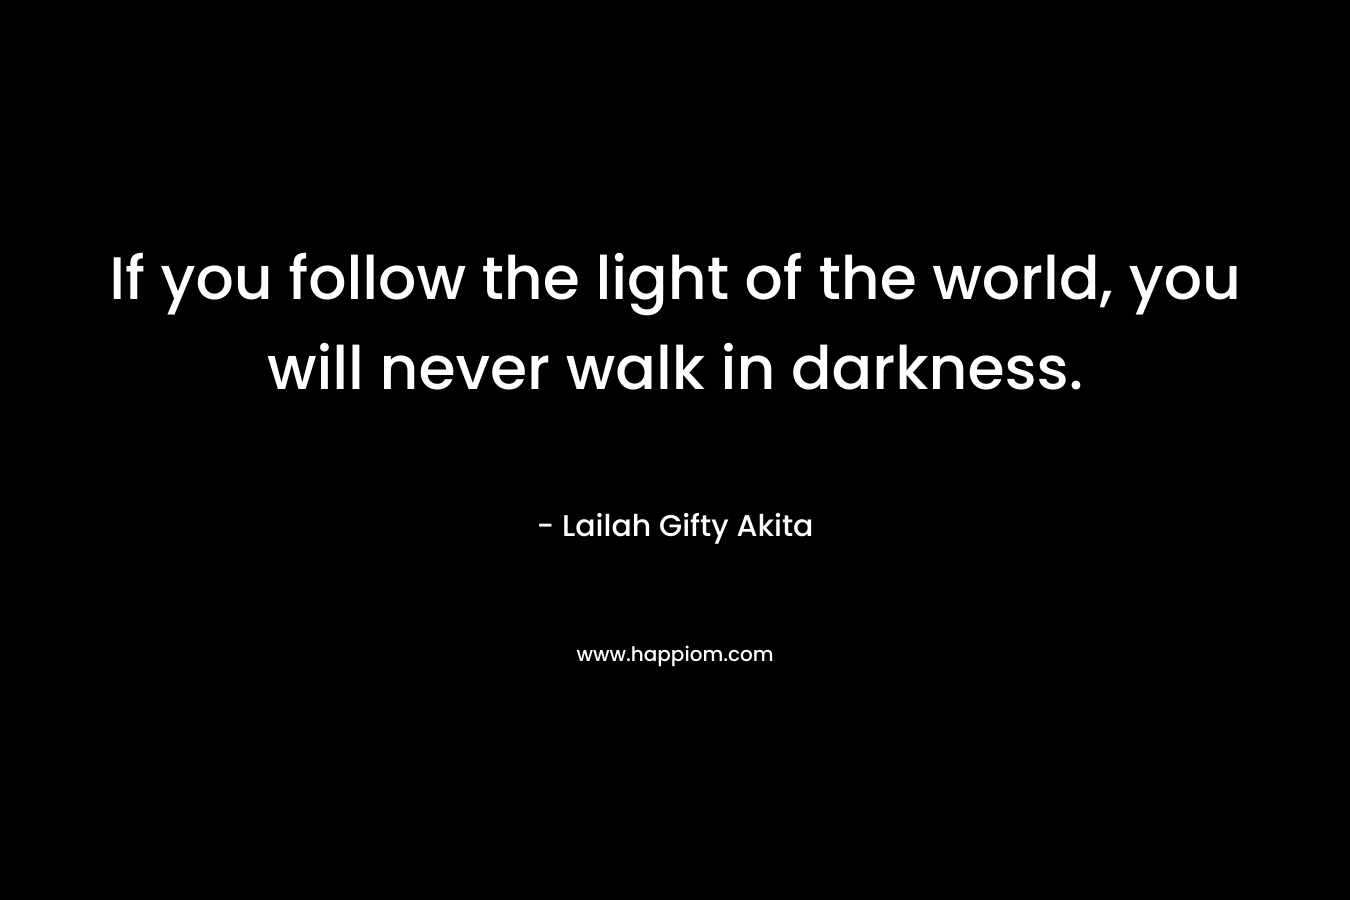 If you follow the light of the world, you will never walk in darkness.